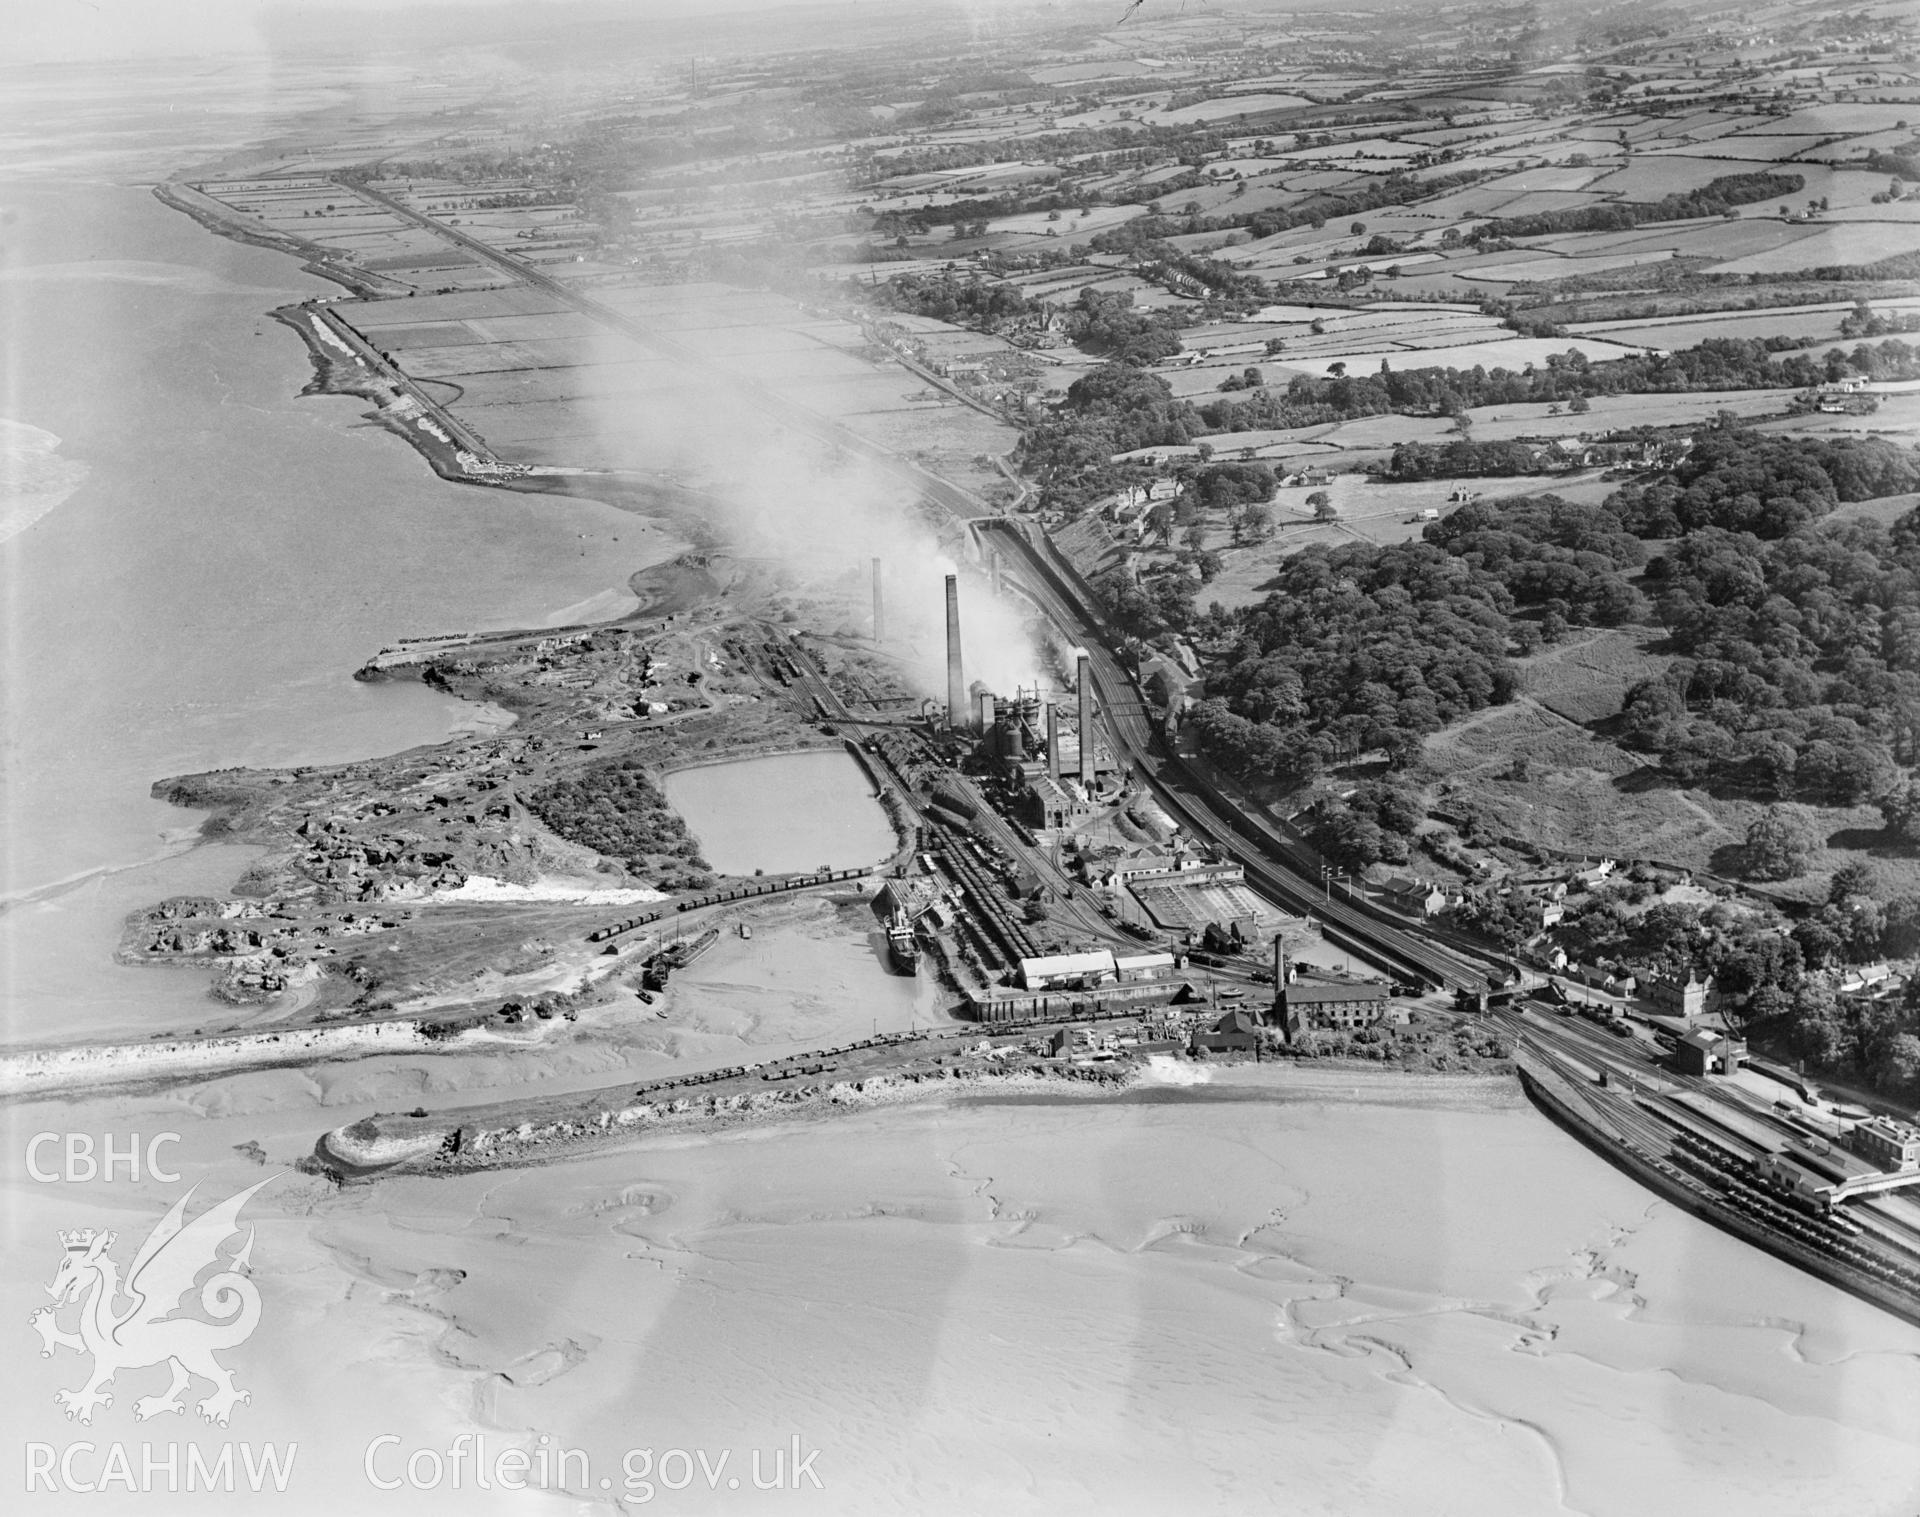 View of Mostyn showing Barwen & Mostyn Iron Co., oblique aerial view. 5?x4? black and white glass plate negative.